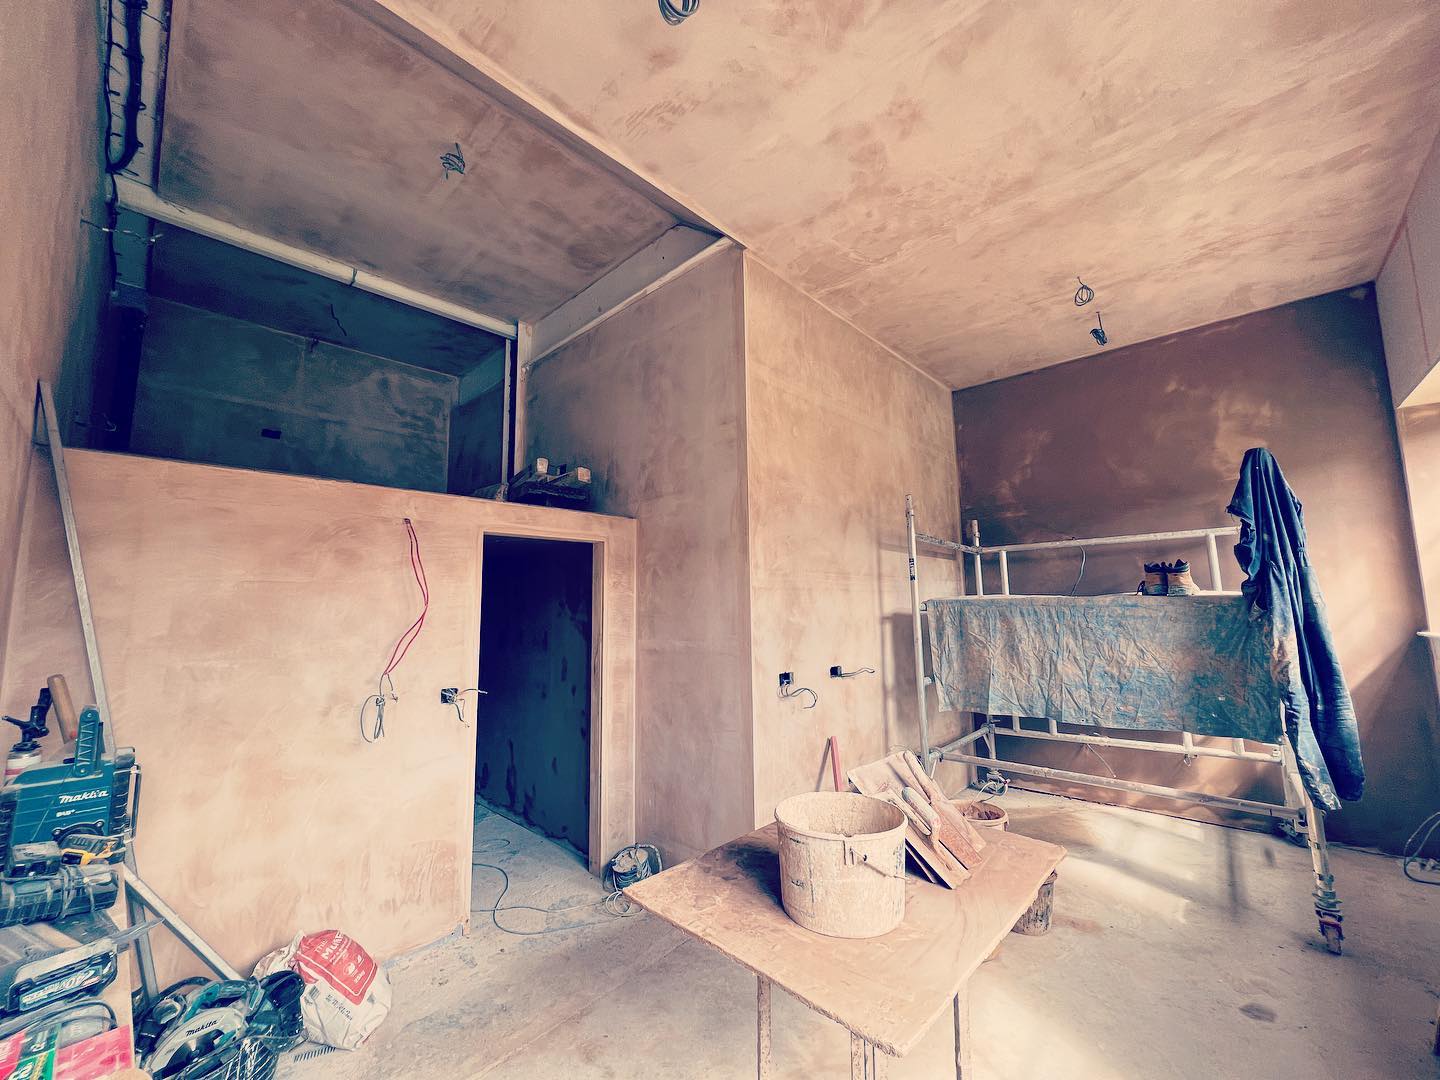 Works in progress at one our projects to form 20 city centre apartments in a redundant commercial property. Great to see the challenging design solutions being formed such as the mezzanine bedroom spaces

 #cheltenhamarchitects #herefordarchitects #apartment #workinprogress #freshplaster #mezzanine #newhome #refurbishment